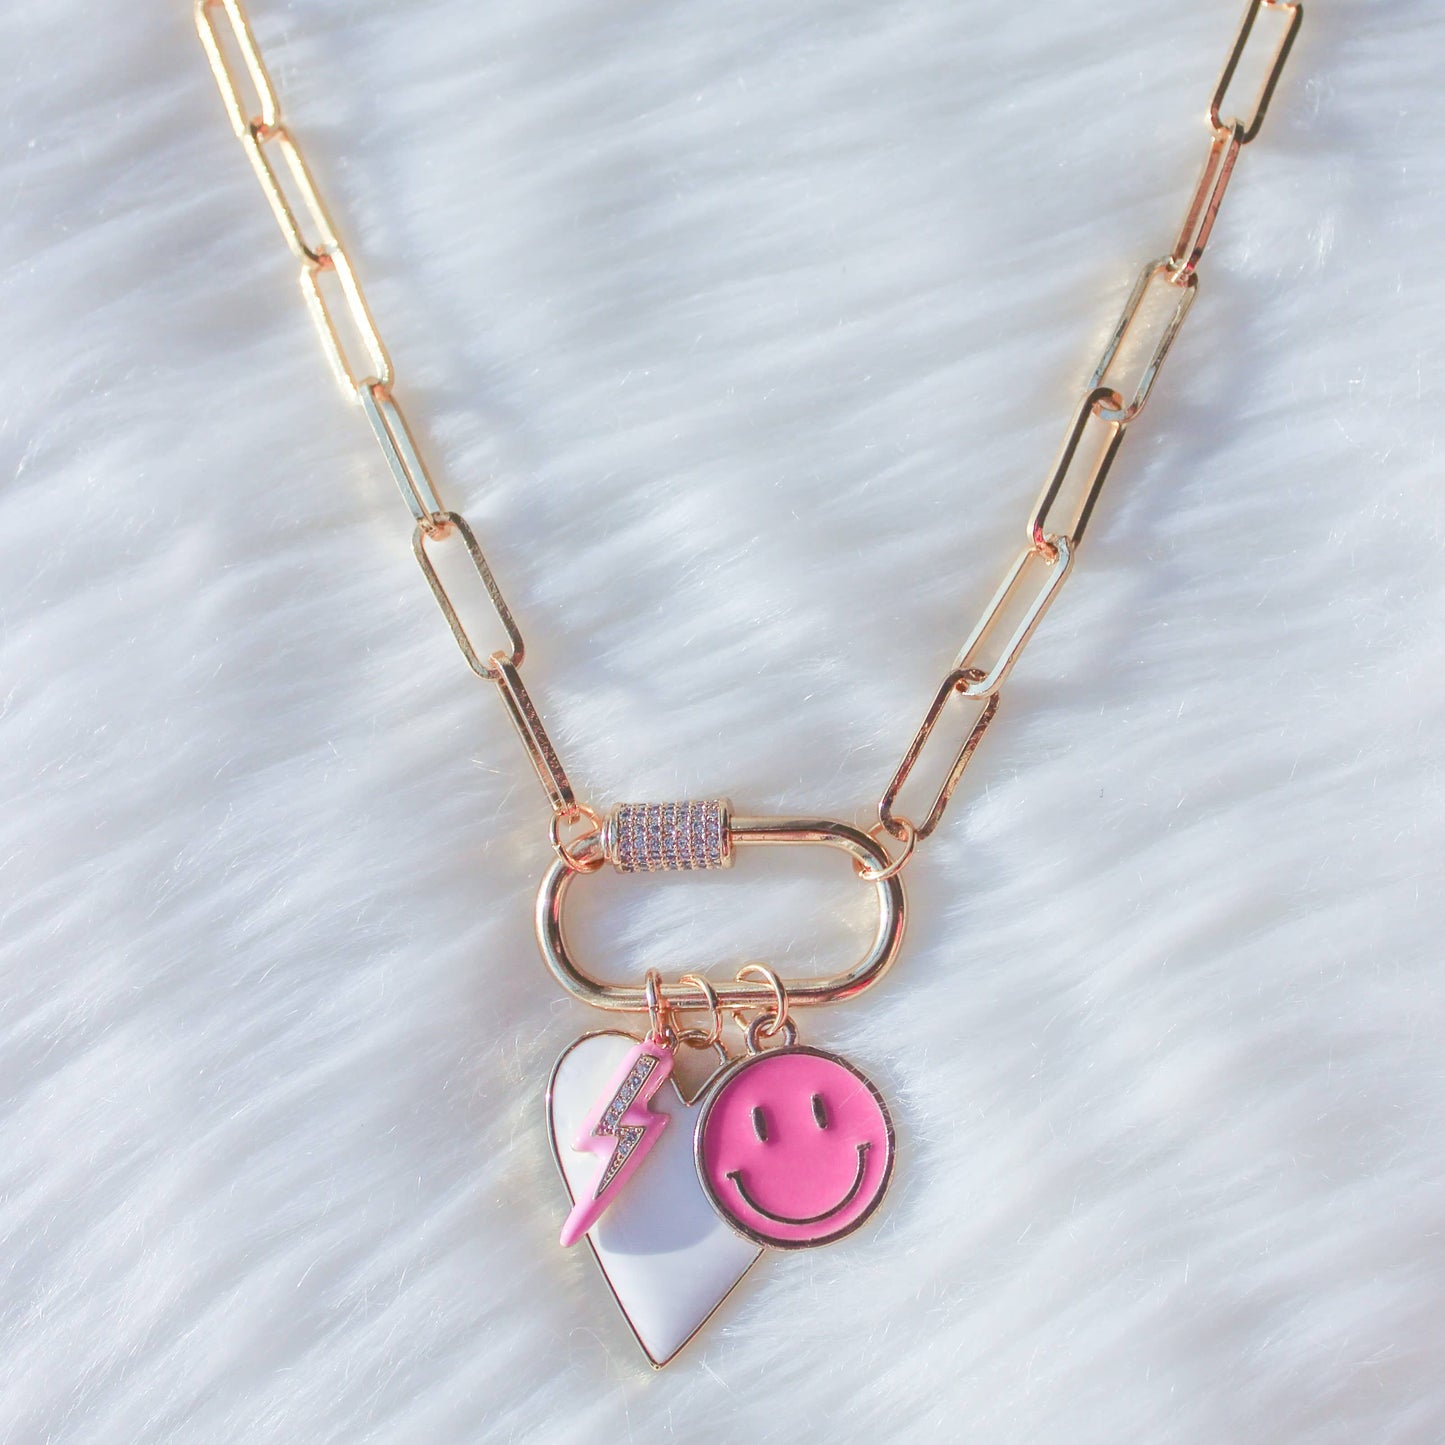 Third Time's a Charm- Lightning, Heart, Smiley Face Necklace